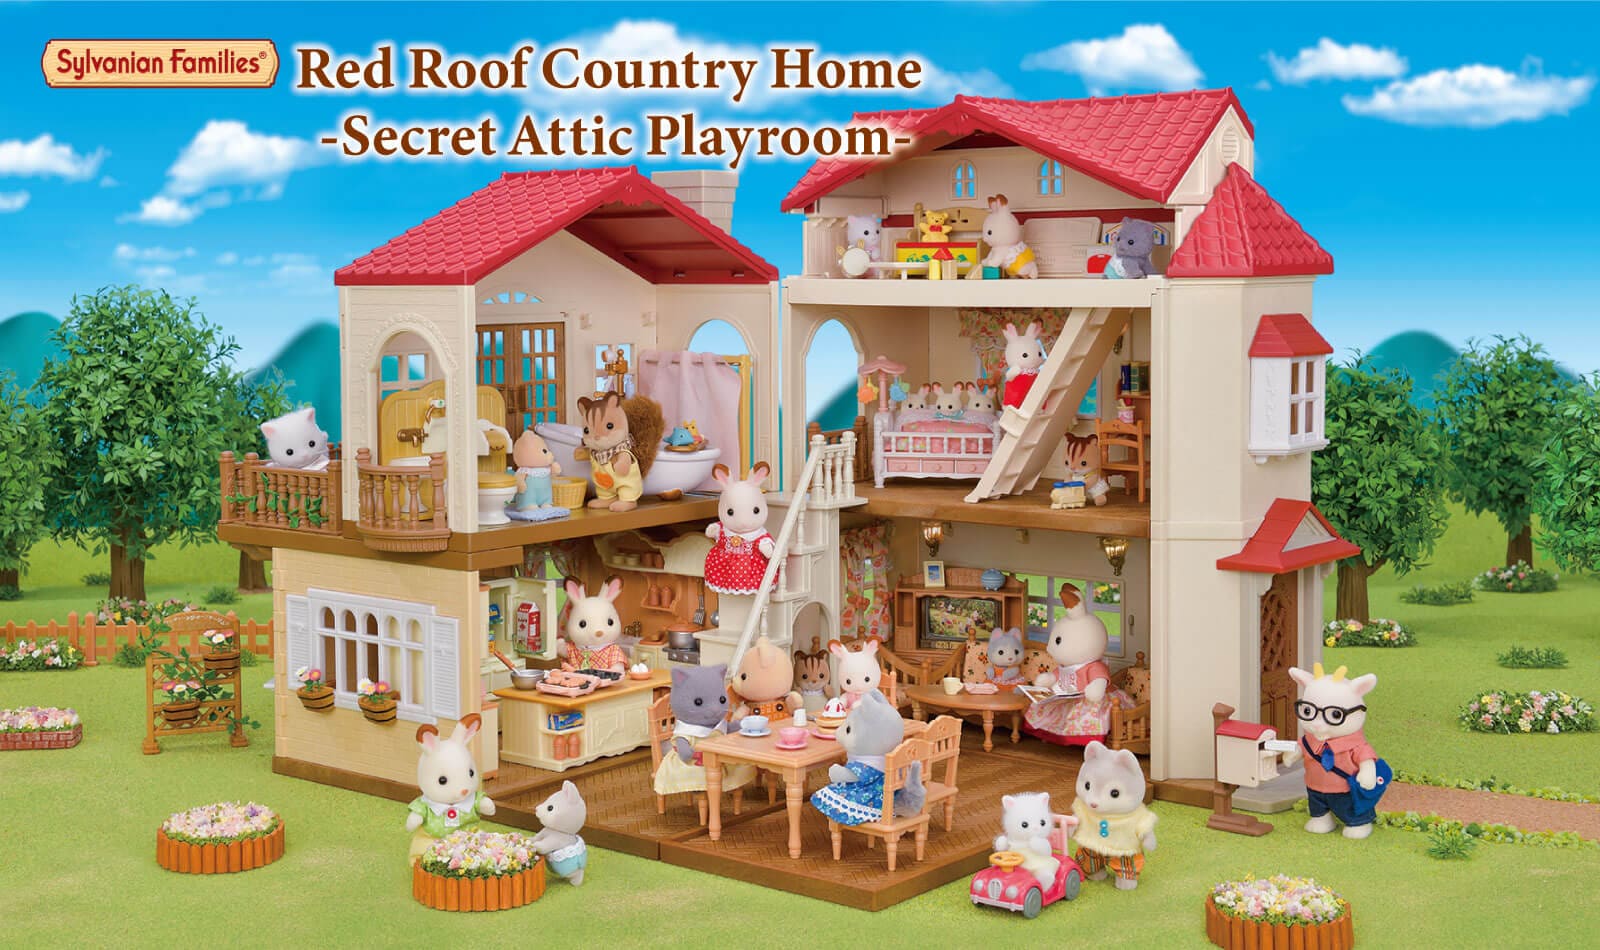 Red Roof Country Home -Secret Attic Playroom-